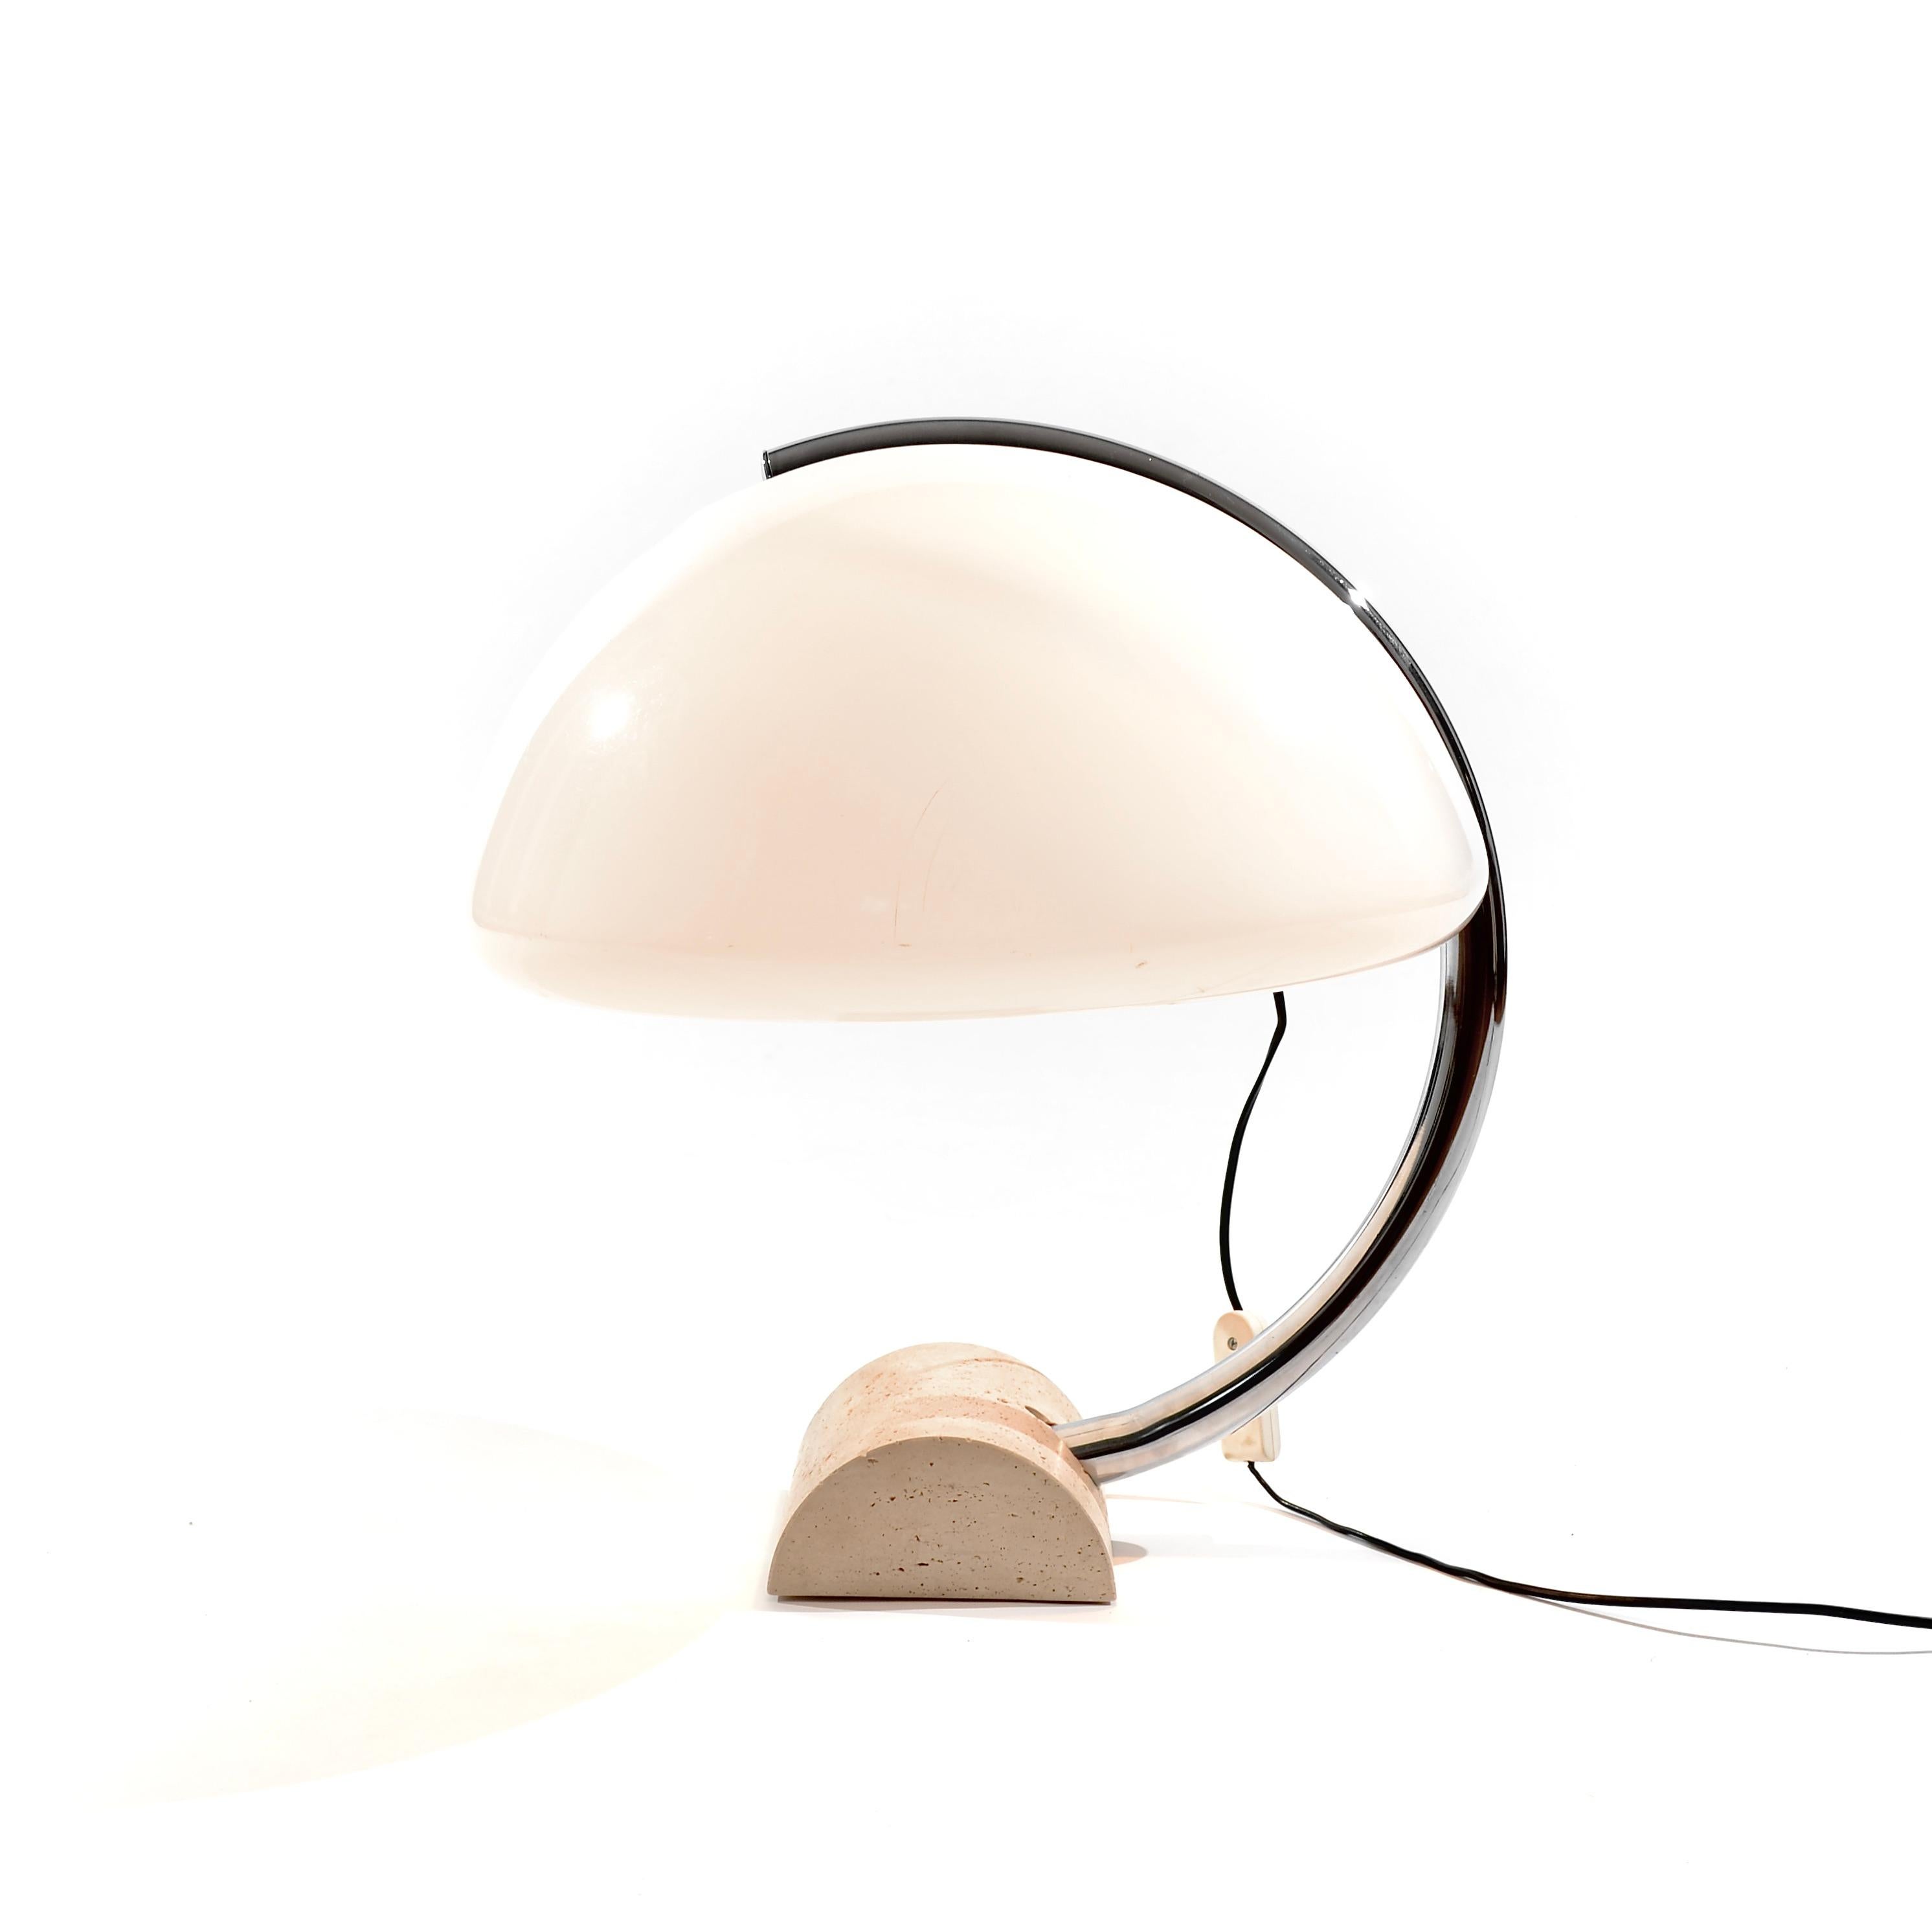 A travertine foot, a curved chrome column topped with a perspex cap, this cobra illuminates wonderfully without dazzling.

If most mushroom lamps offered a pop line featuring metal and plastic, this version shows a completely different refinement